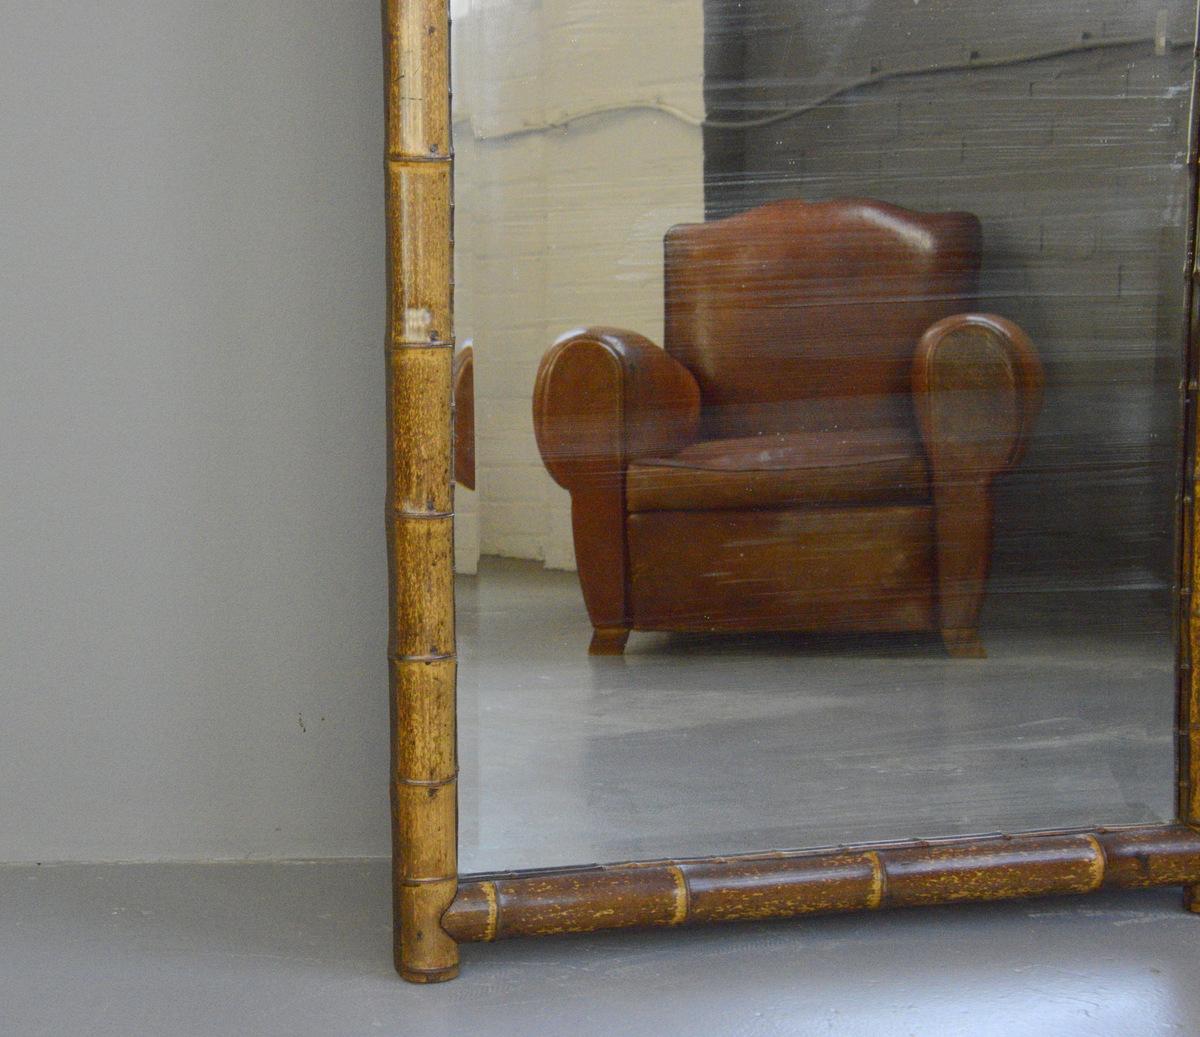 19th century real bamboo dressing room mirror

- Mercury glass mirror plate
- Real Bamboo frame
- Panelled back
- French ~ Dated April 1889
- 169cm tall x 101cm wide x 6cm deep

Condition Report

Some light patina to the mirror plate, the